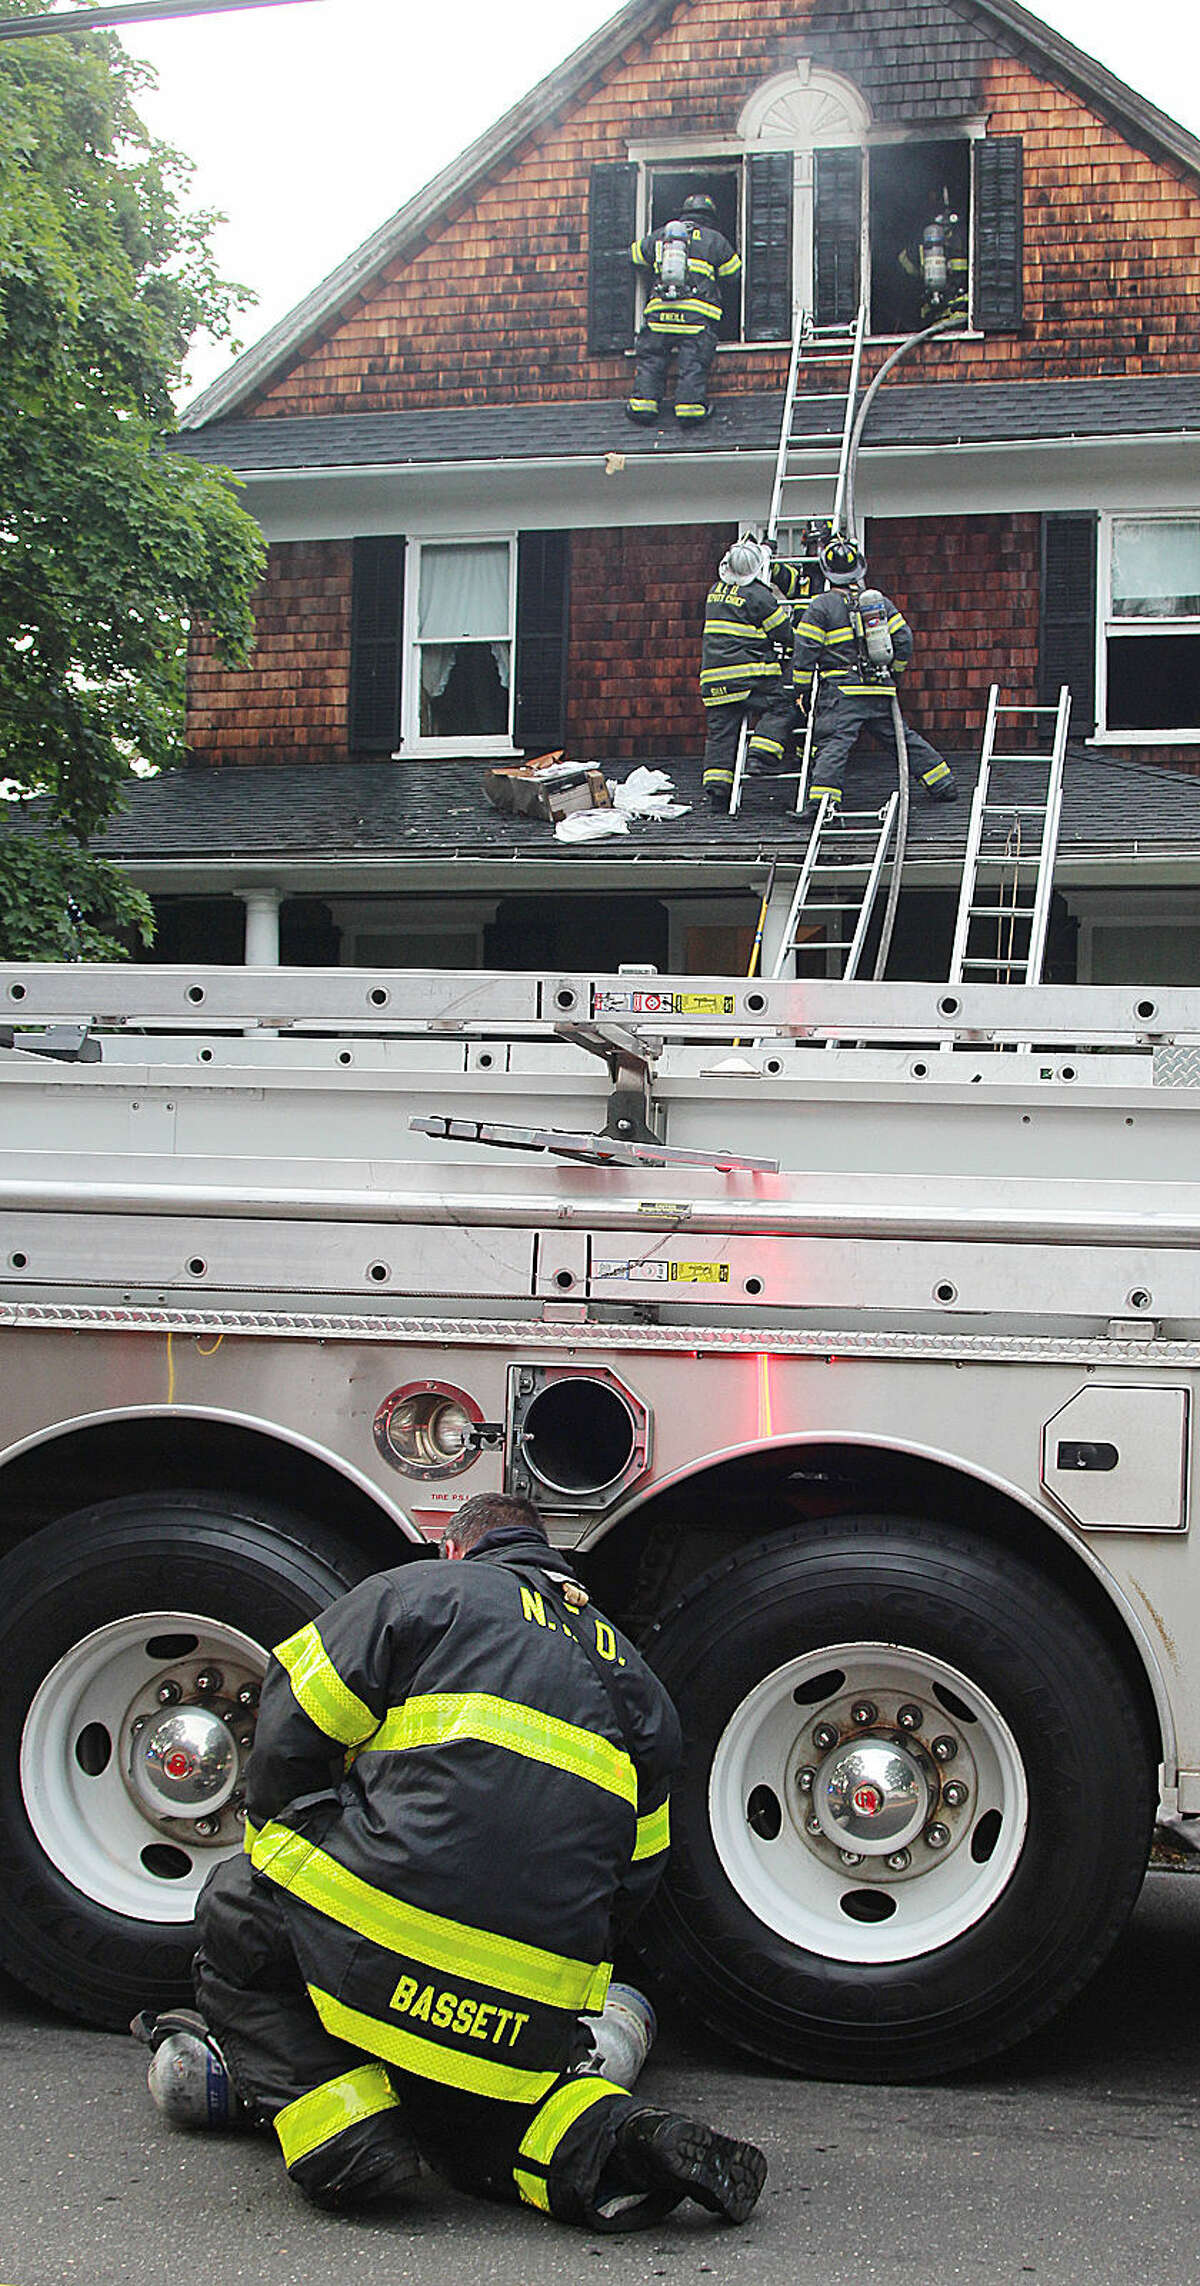 Hour photo / Chris Bosak Firefighters battle a fire at 1 Cannon St. in Norwalk on Monday evening.